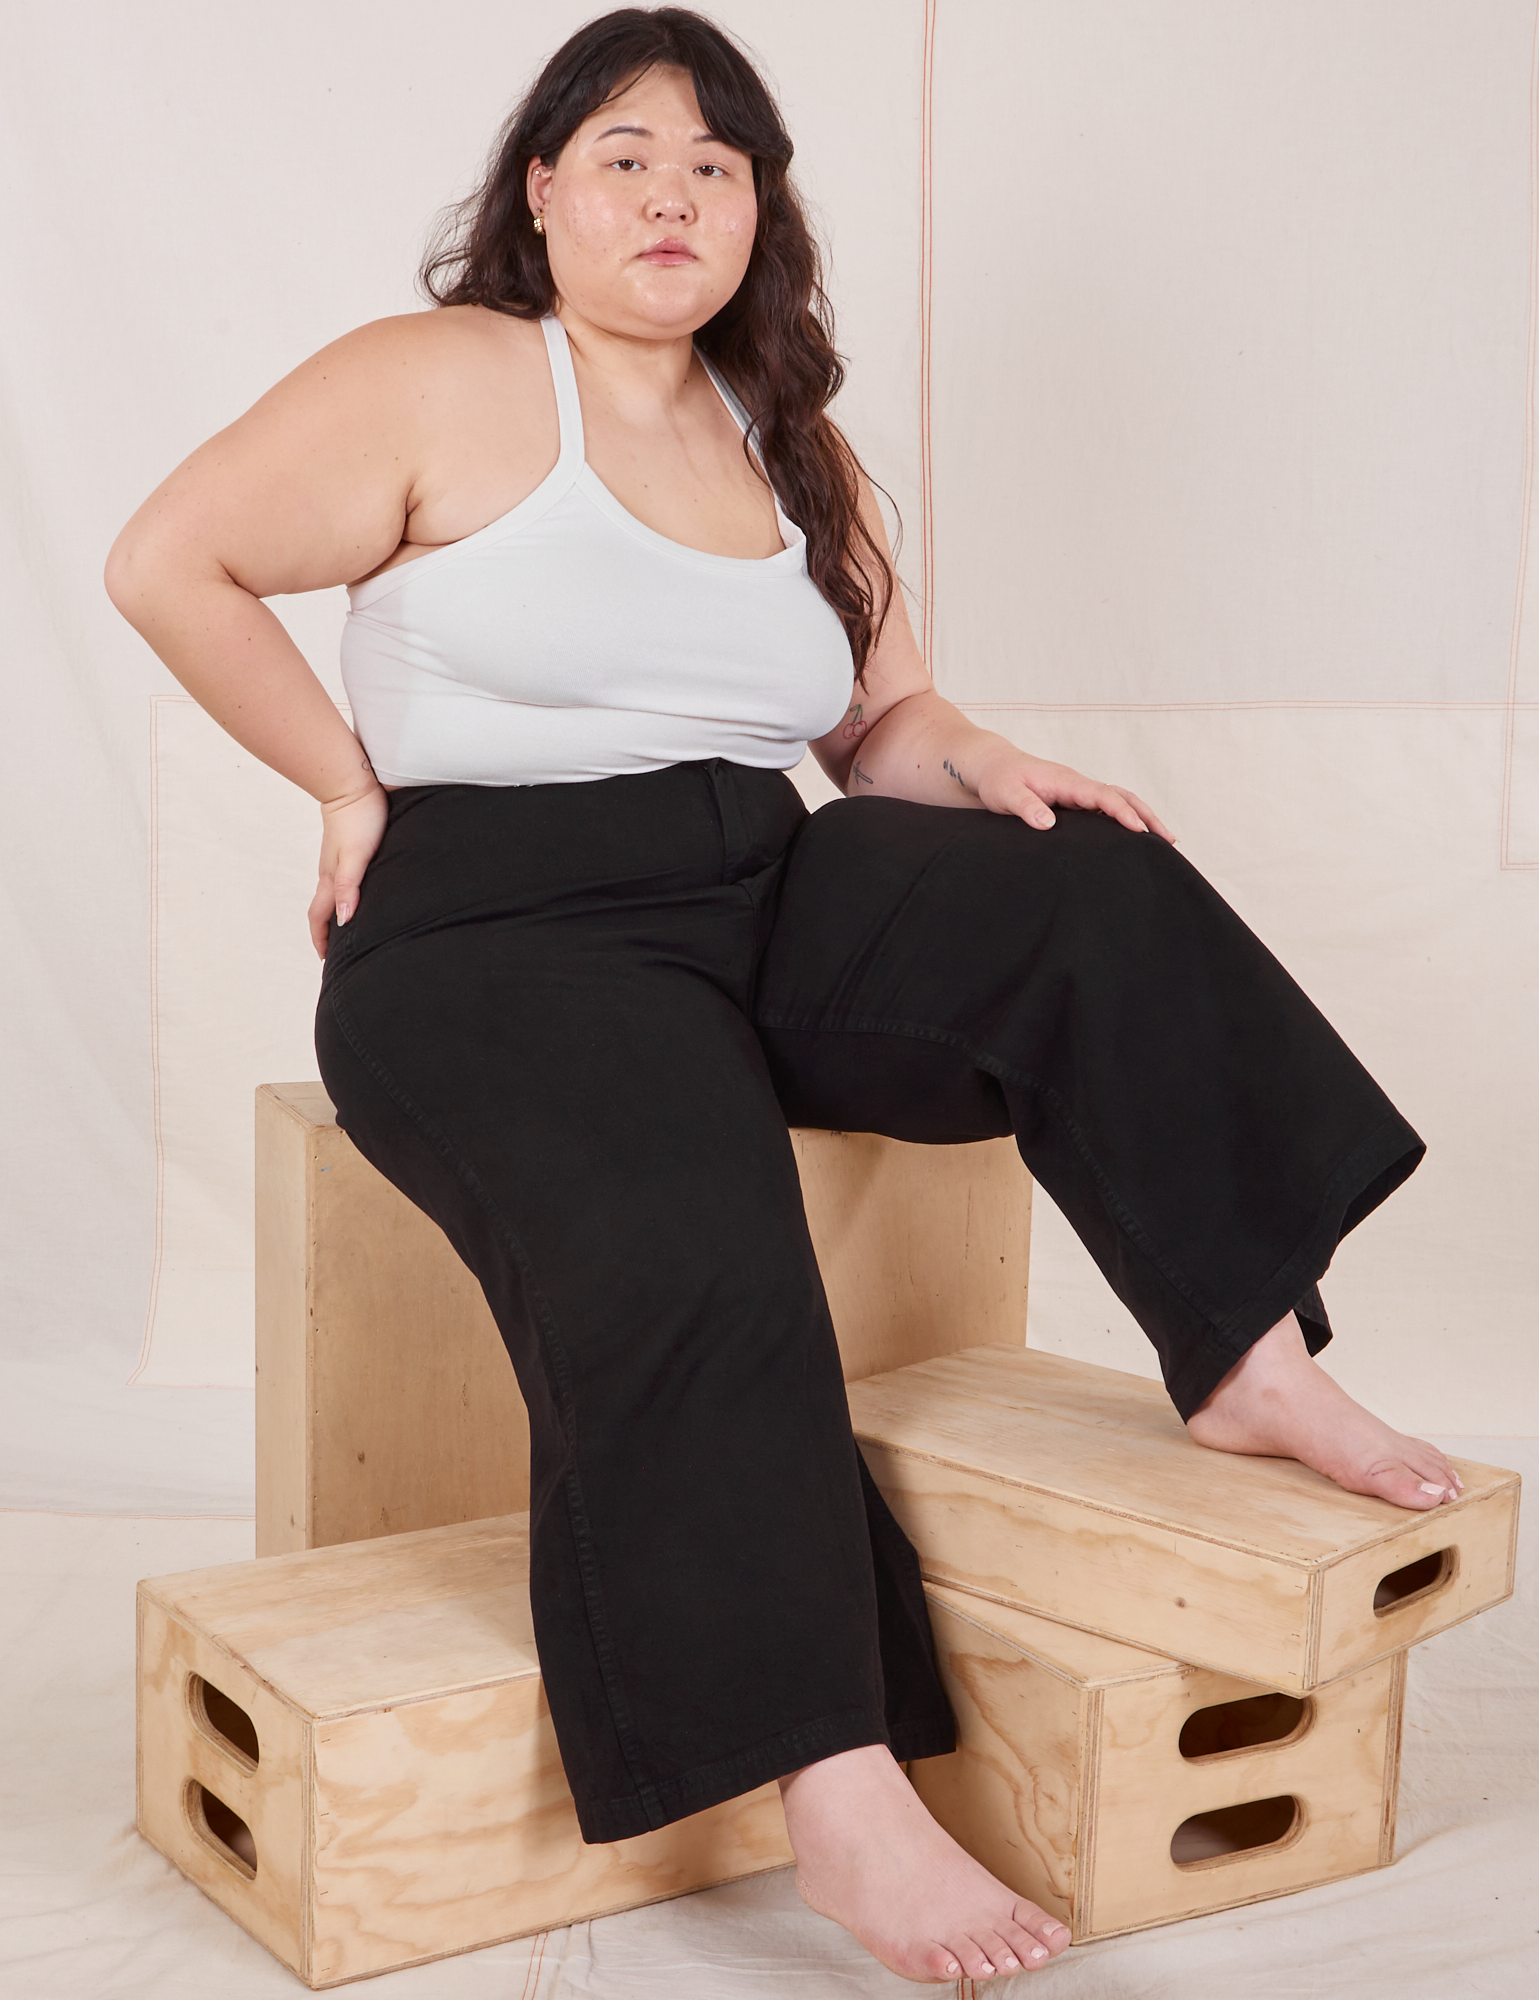 Ashley is wearing Petite Bell Bottoms in Basic Black and Halter Top in vintage tee off-white